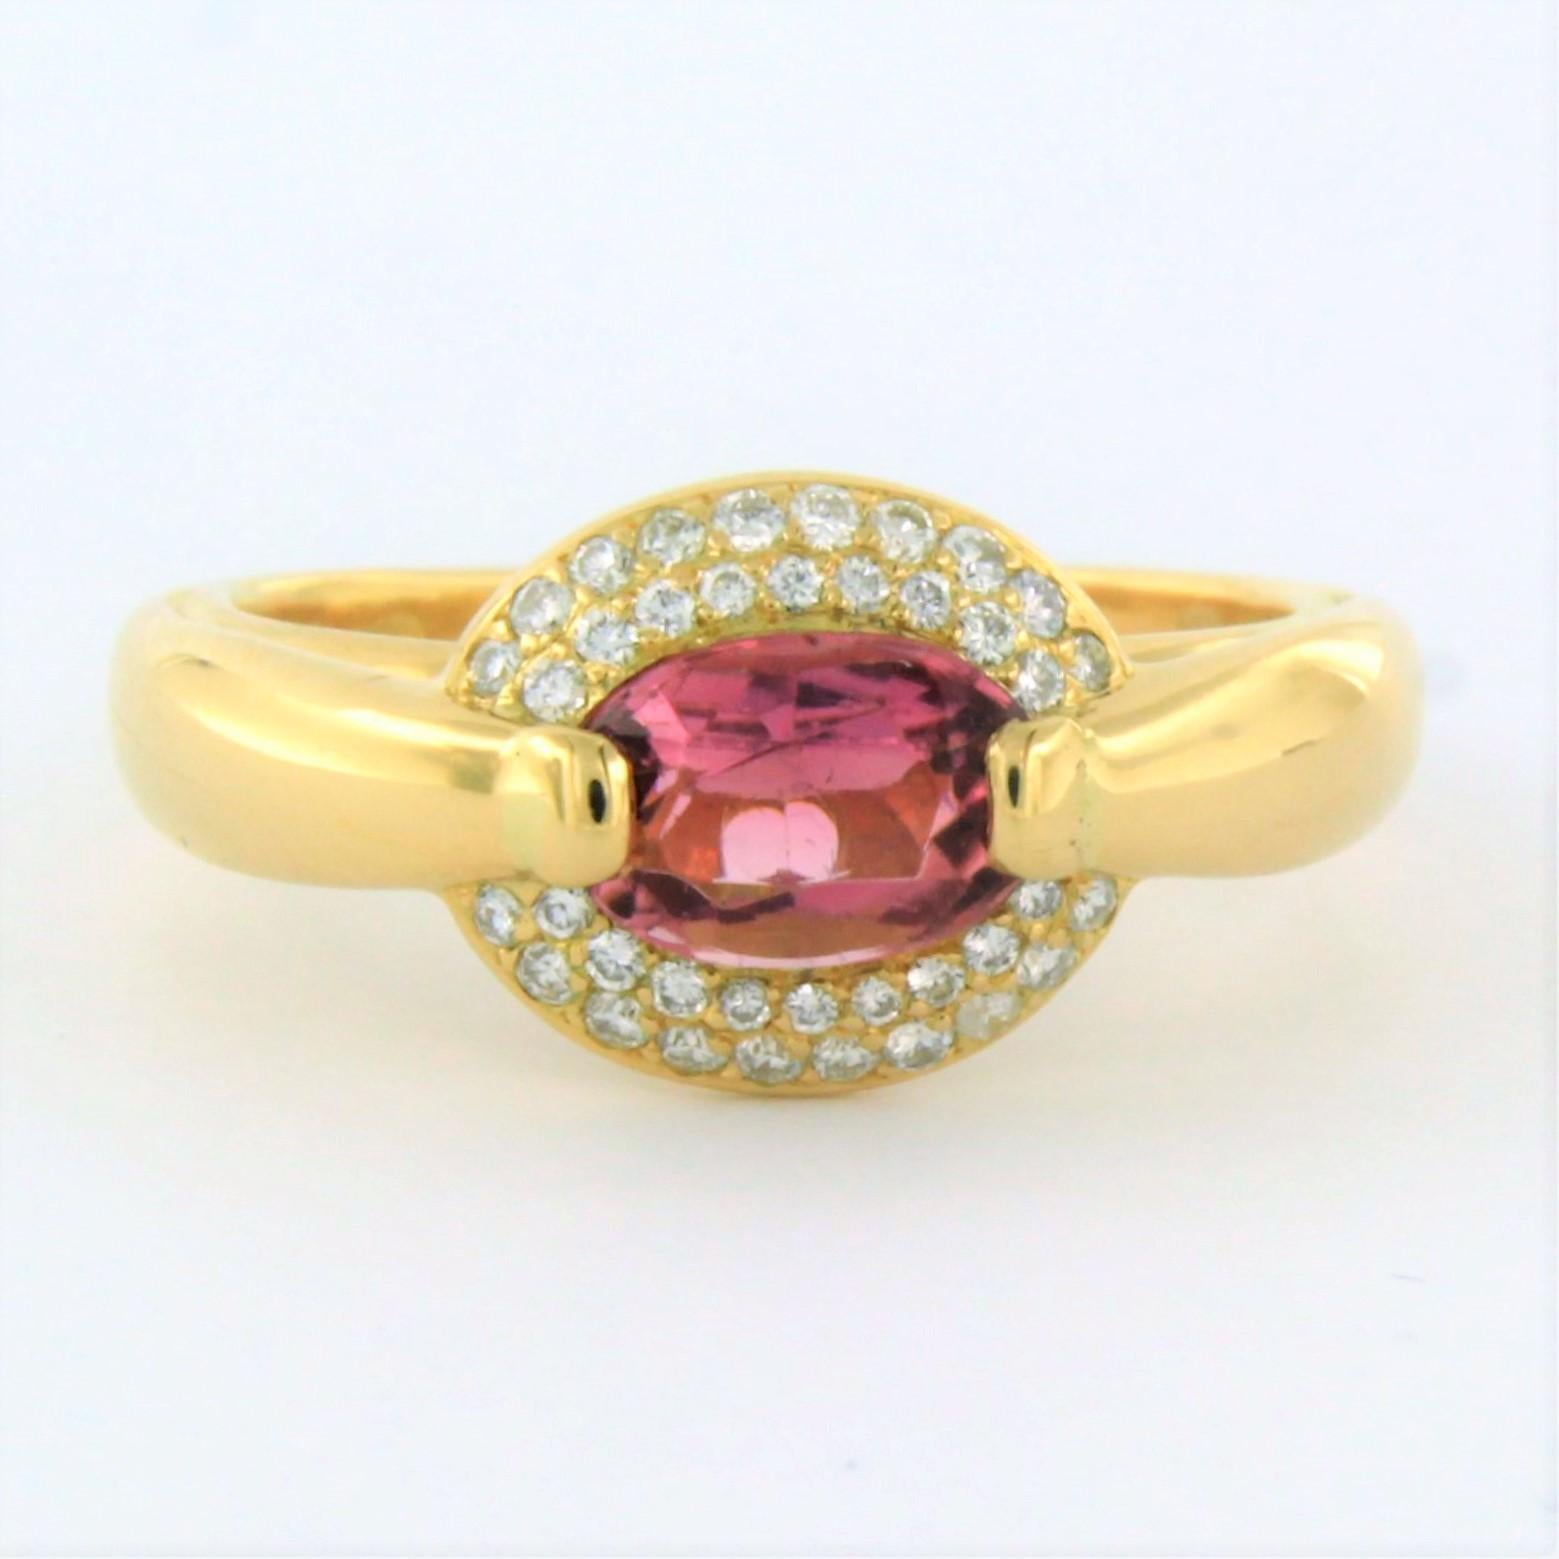 18k yellow gold ring with tourmaline and brilliant cut diamond. 0.70ct - F/G - VS/SI - ring size U.S. 8.5 - EU. 18.5(58)

detailed description

the top of the ring is 1.0 cm wide by 7.2 mm high

weight 8.3 grams

ring size U.S. 8.5 - EU. 18.5(58),